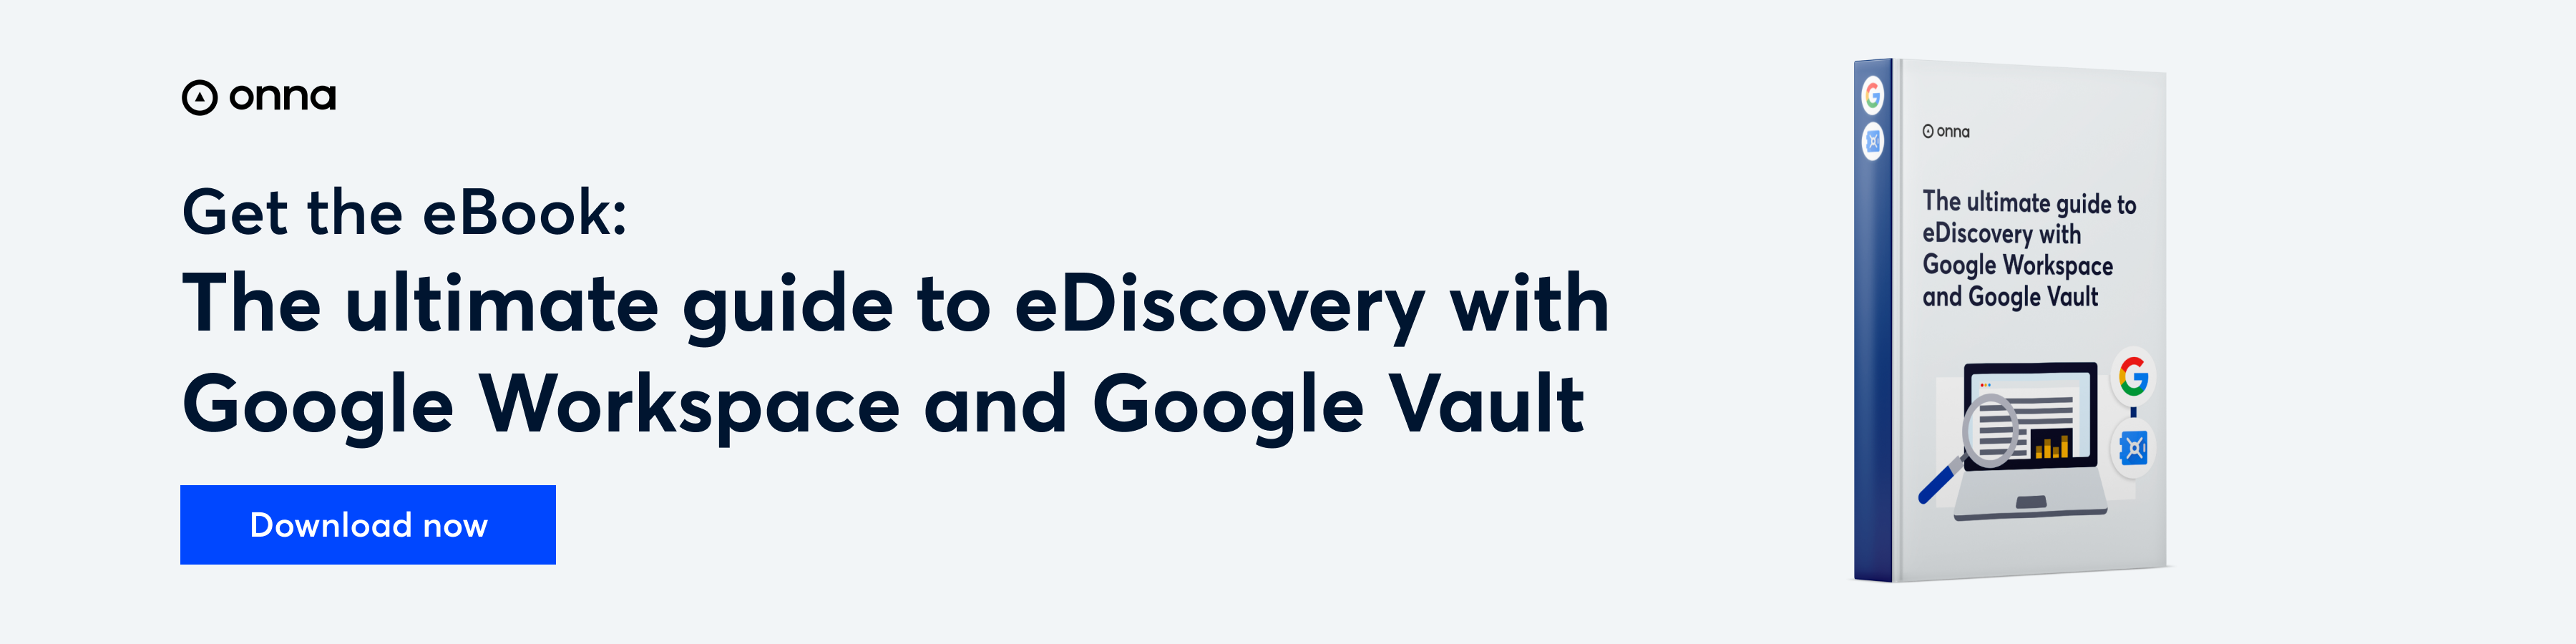 Get the eBook: The ultimate guide to eDiscovery with Google Workspace and Google Vault